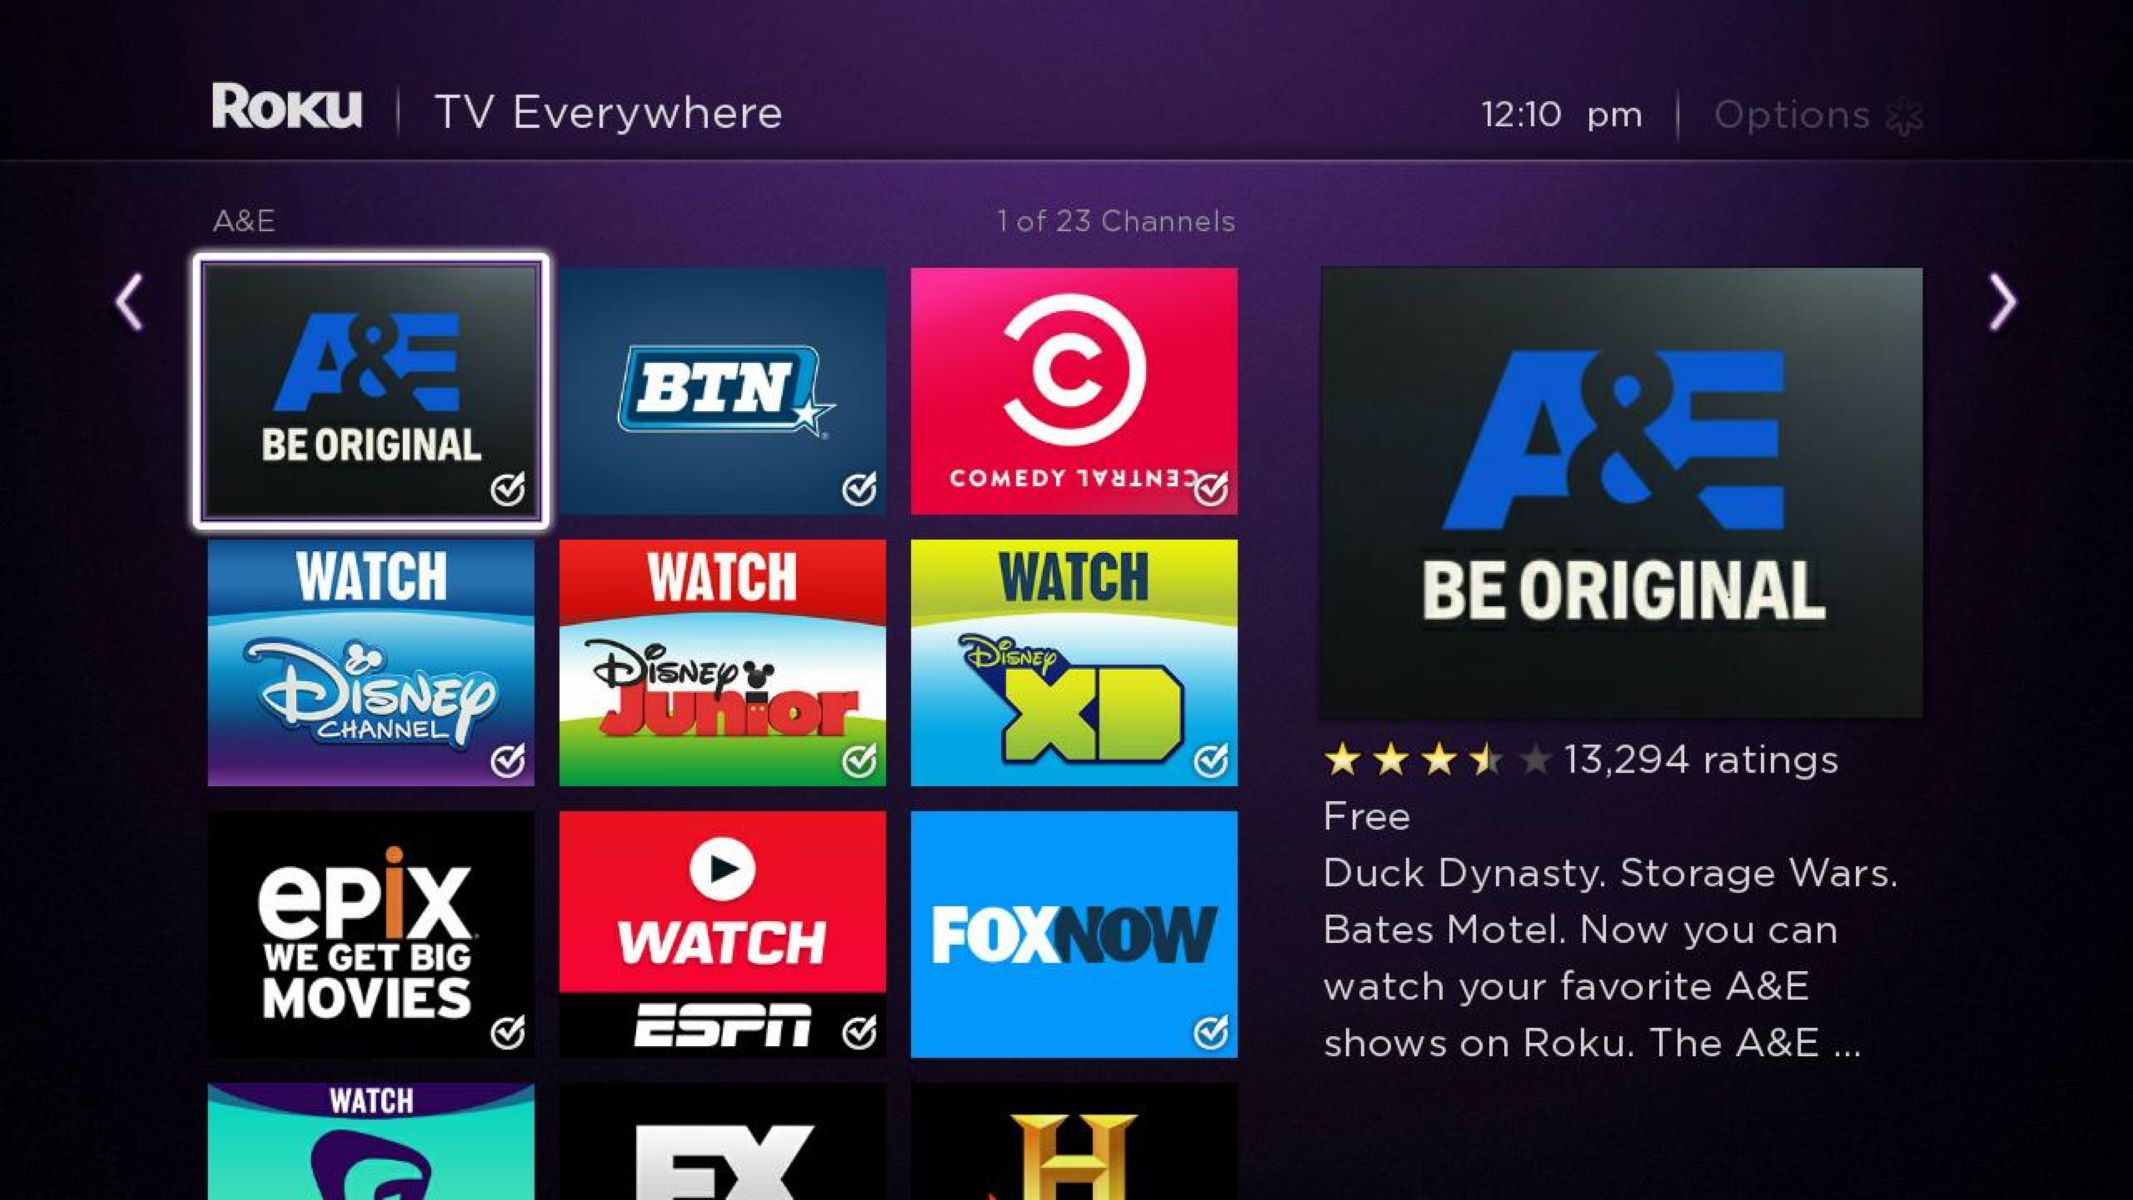 How To Watch Movies On Roku